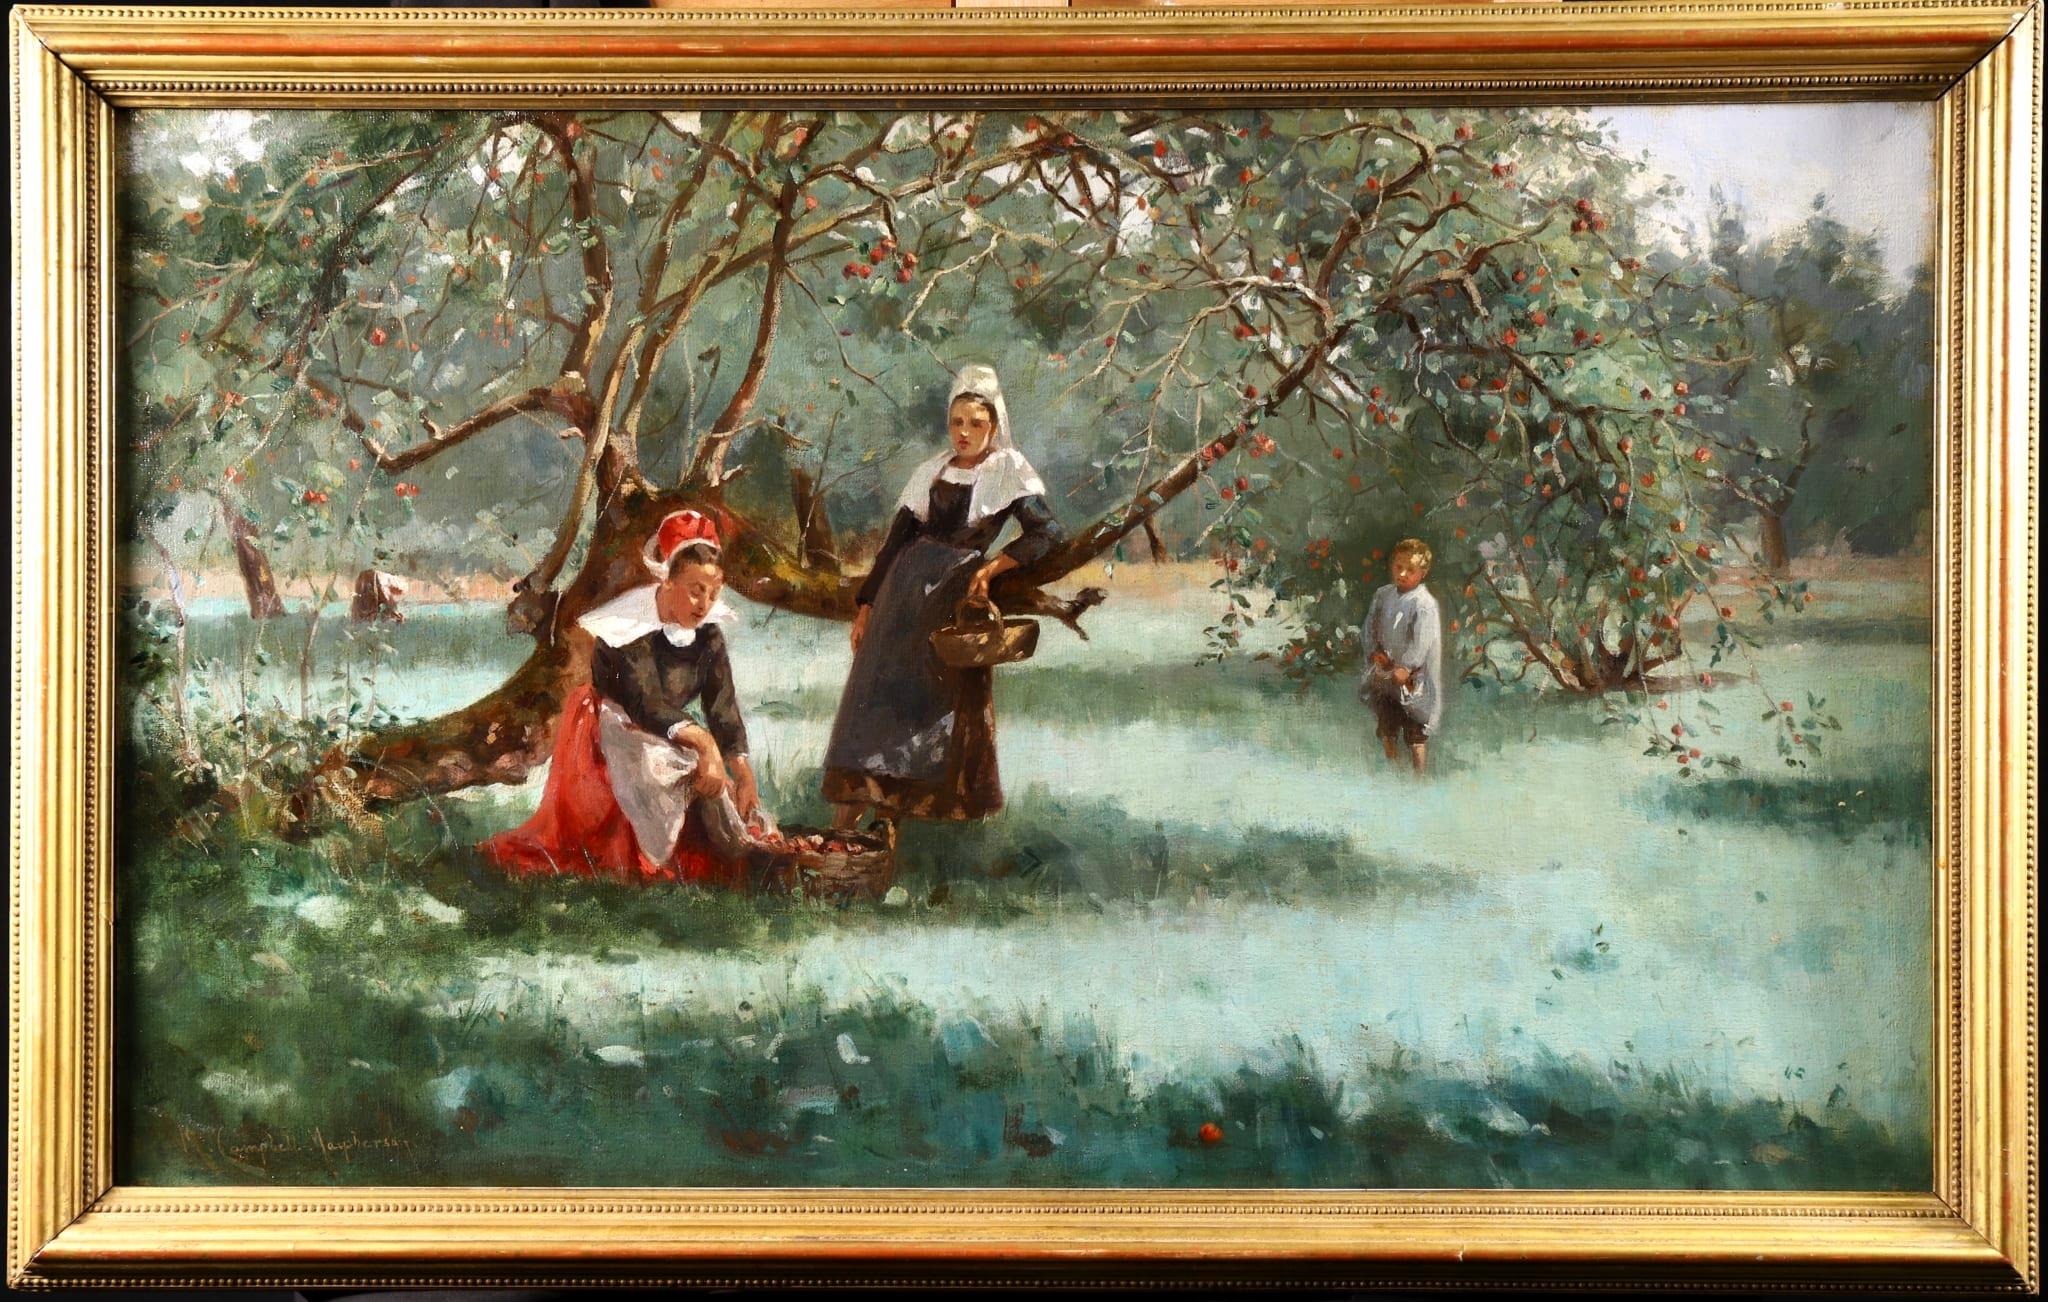 Collecting Apples - Impressionist Oil, Figures in Landscape by M C Macpherson  - Painting by Margaret Campbell MacPherson